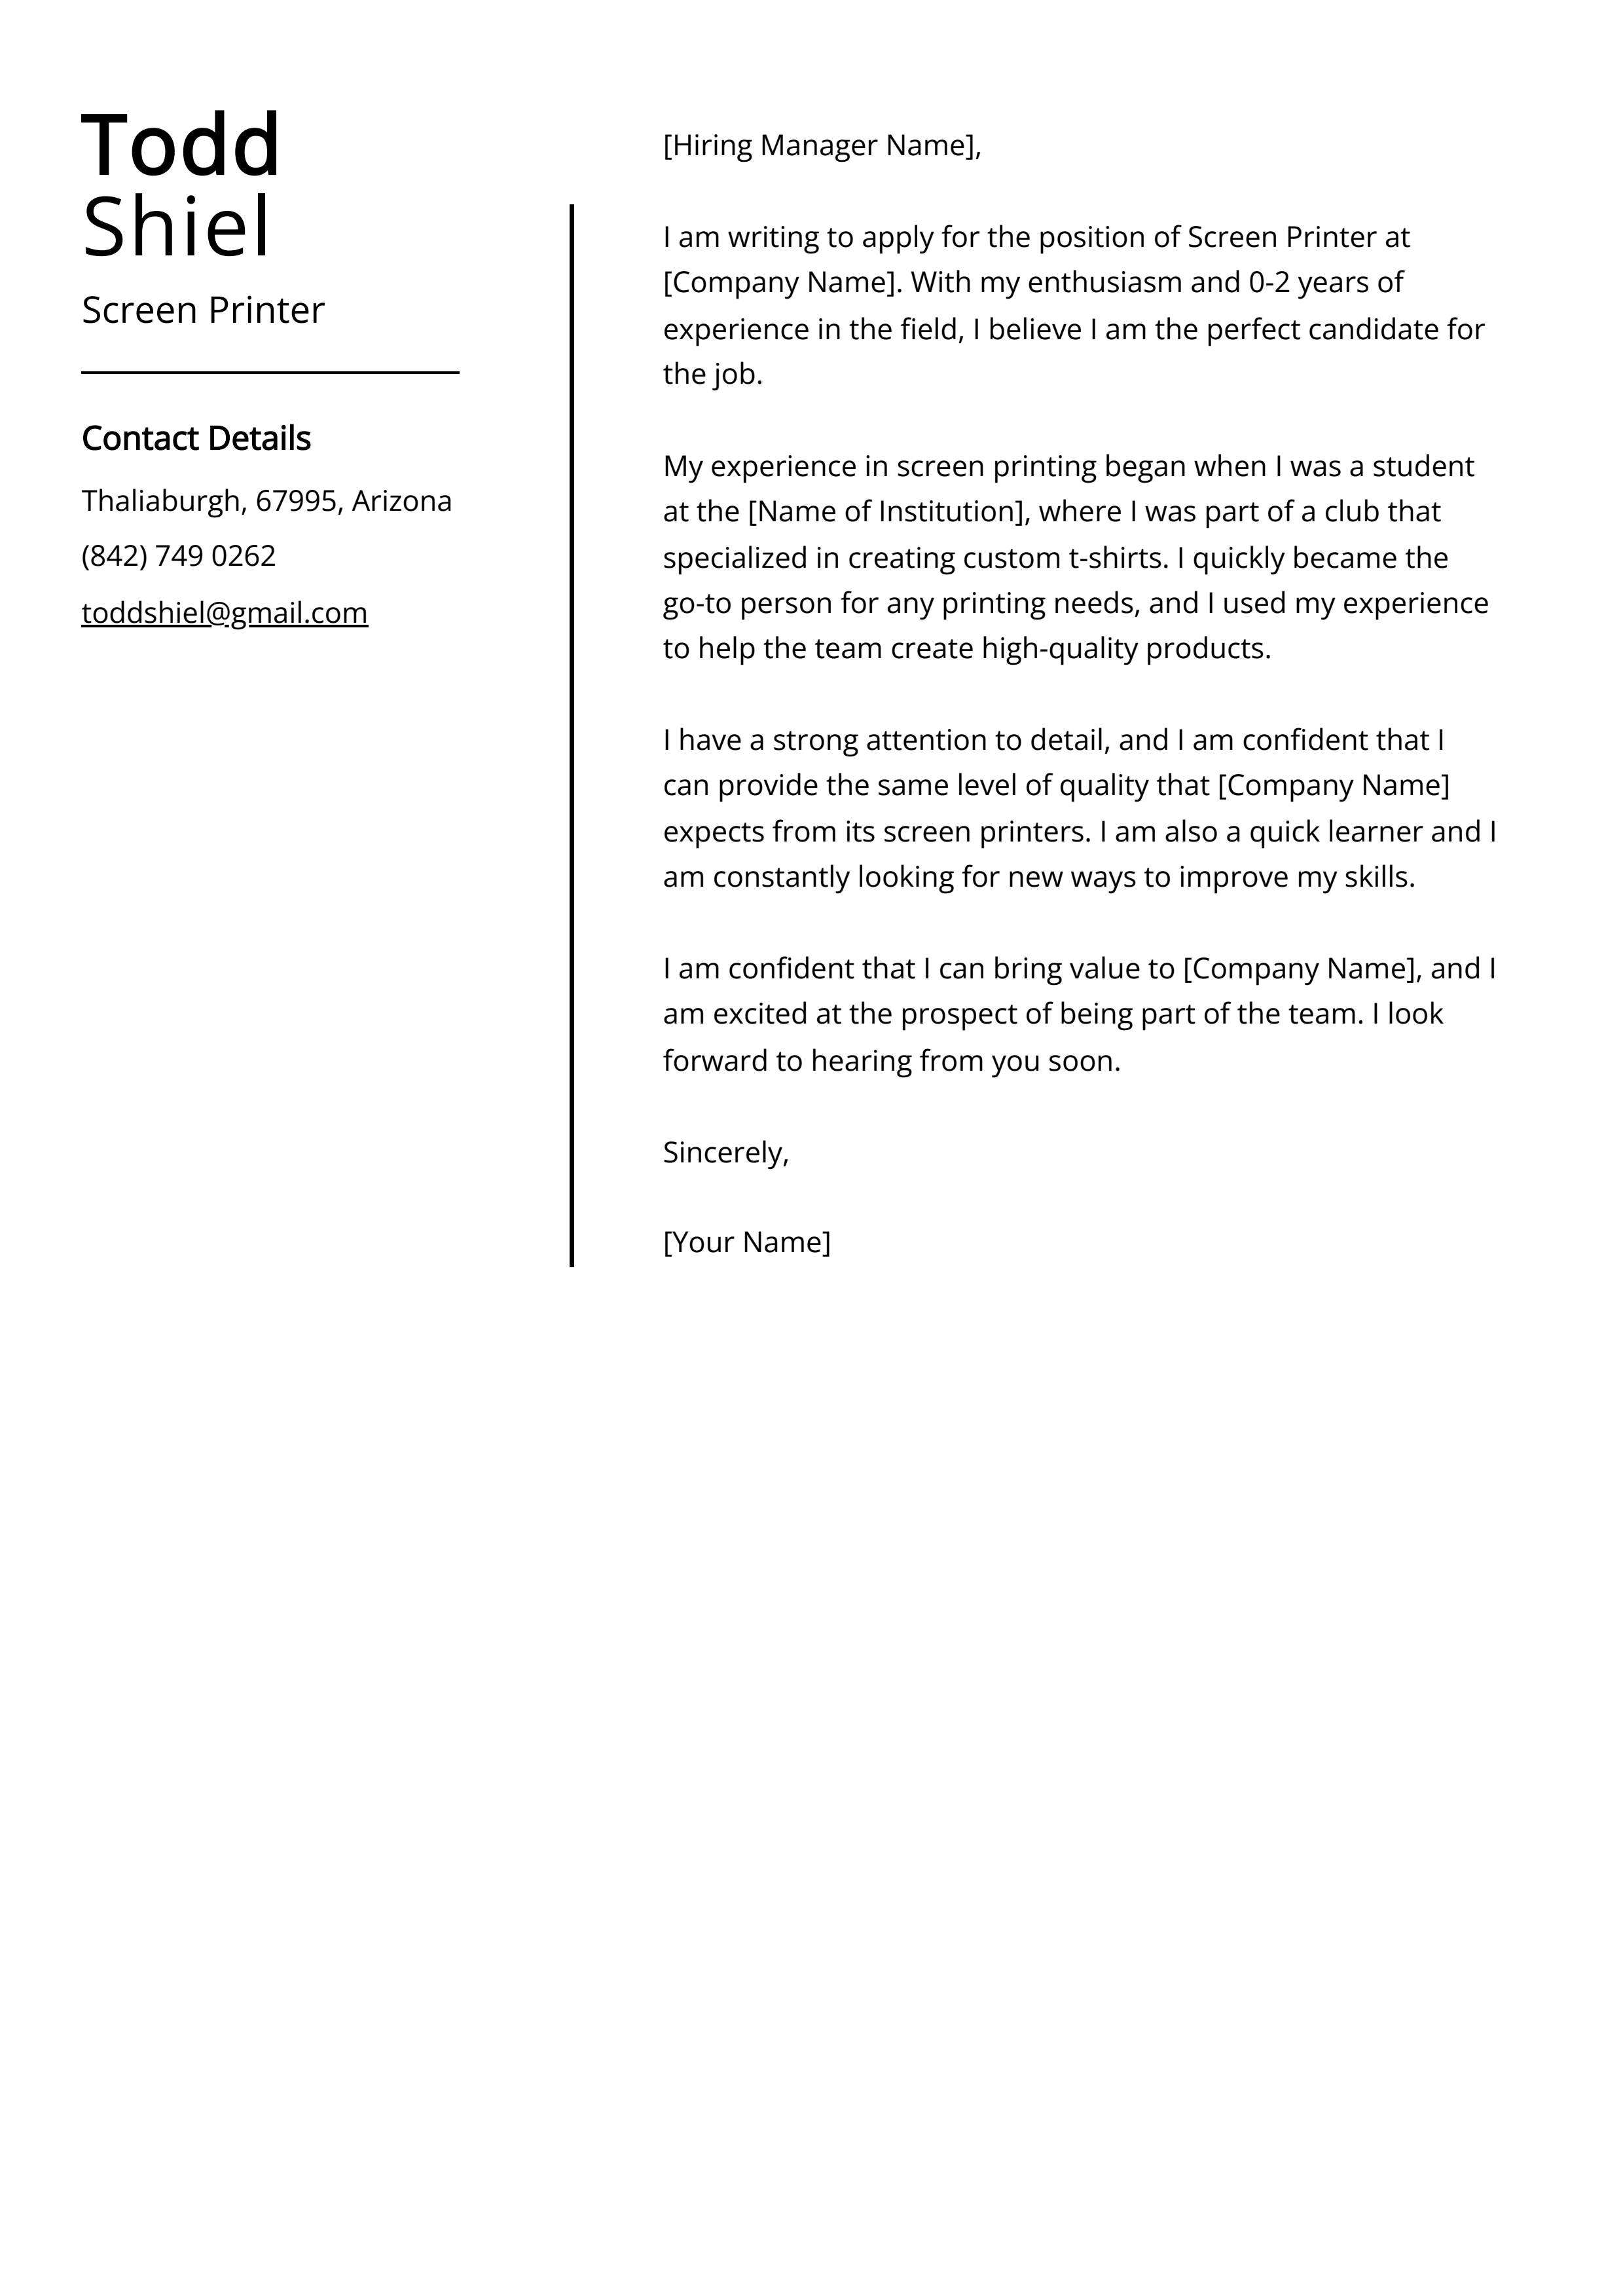 Screen Printer Cover Letter Example